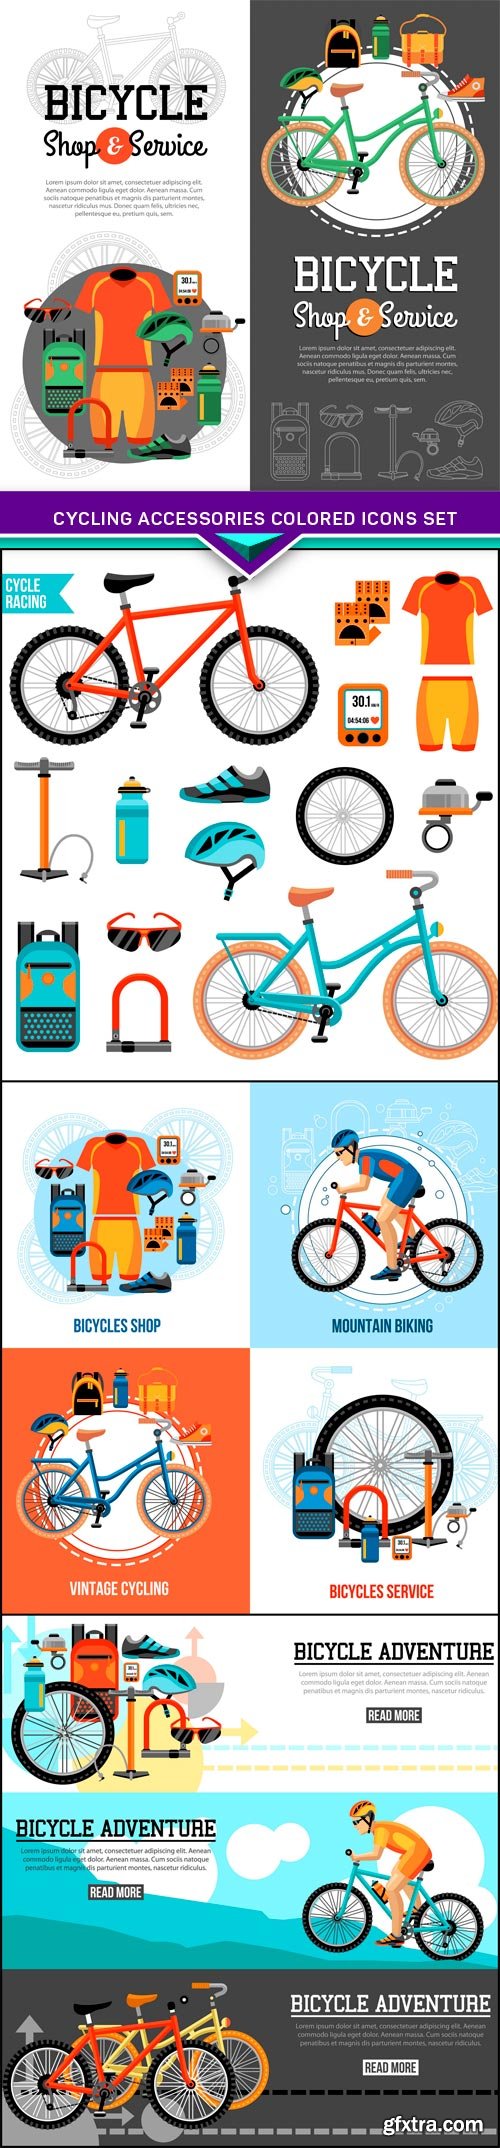 Cycling accessories colored icons set 4X EPS